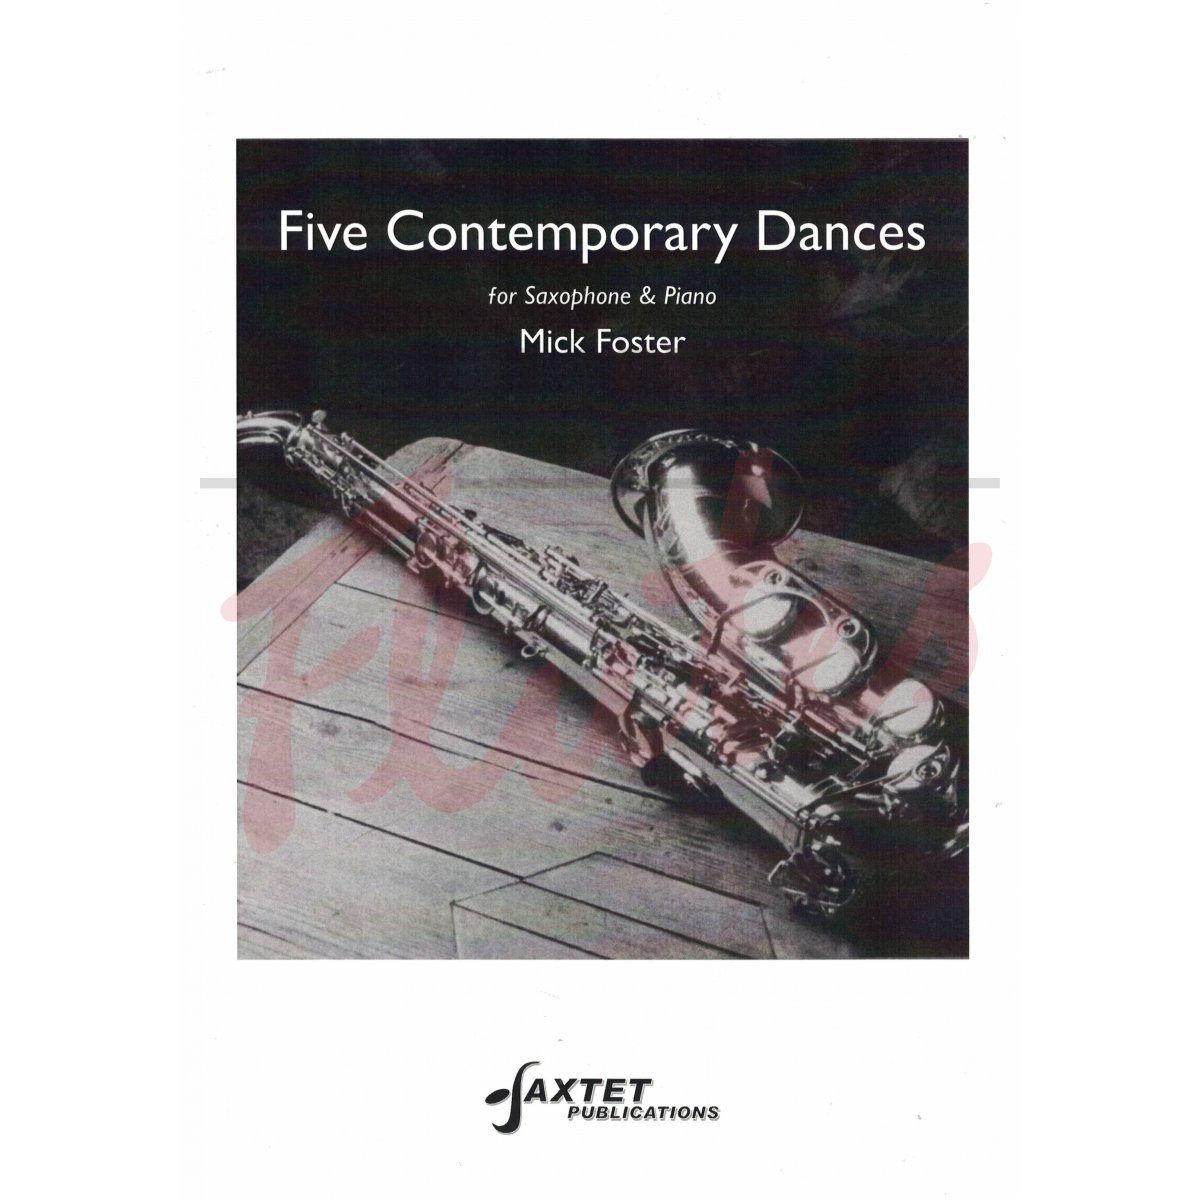 Five Contemporary Dances for Saxophone and Piano